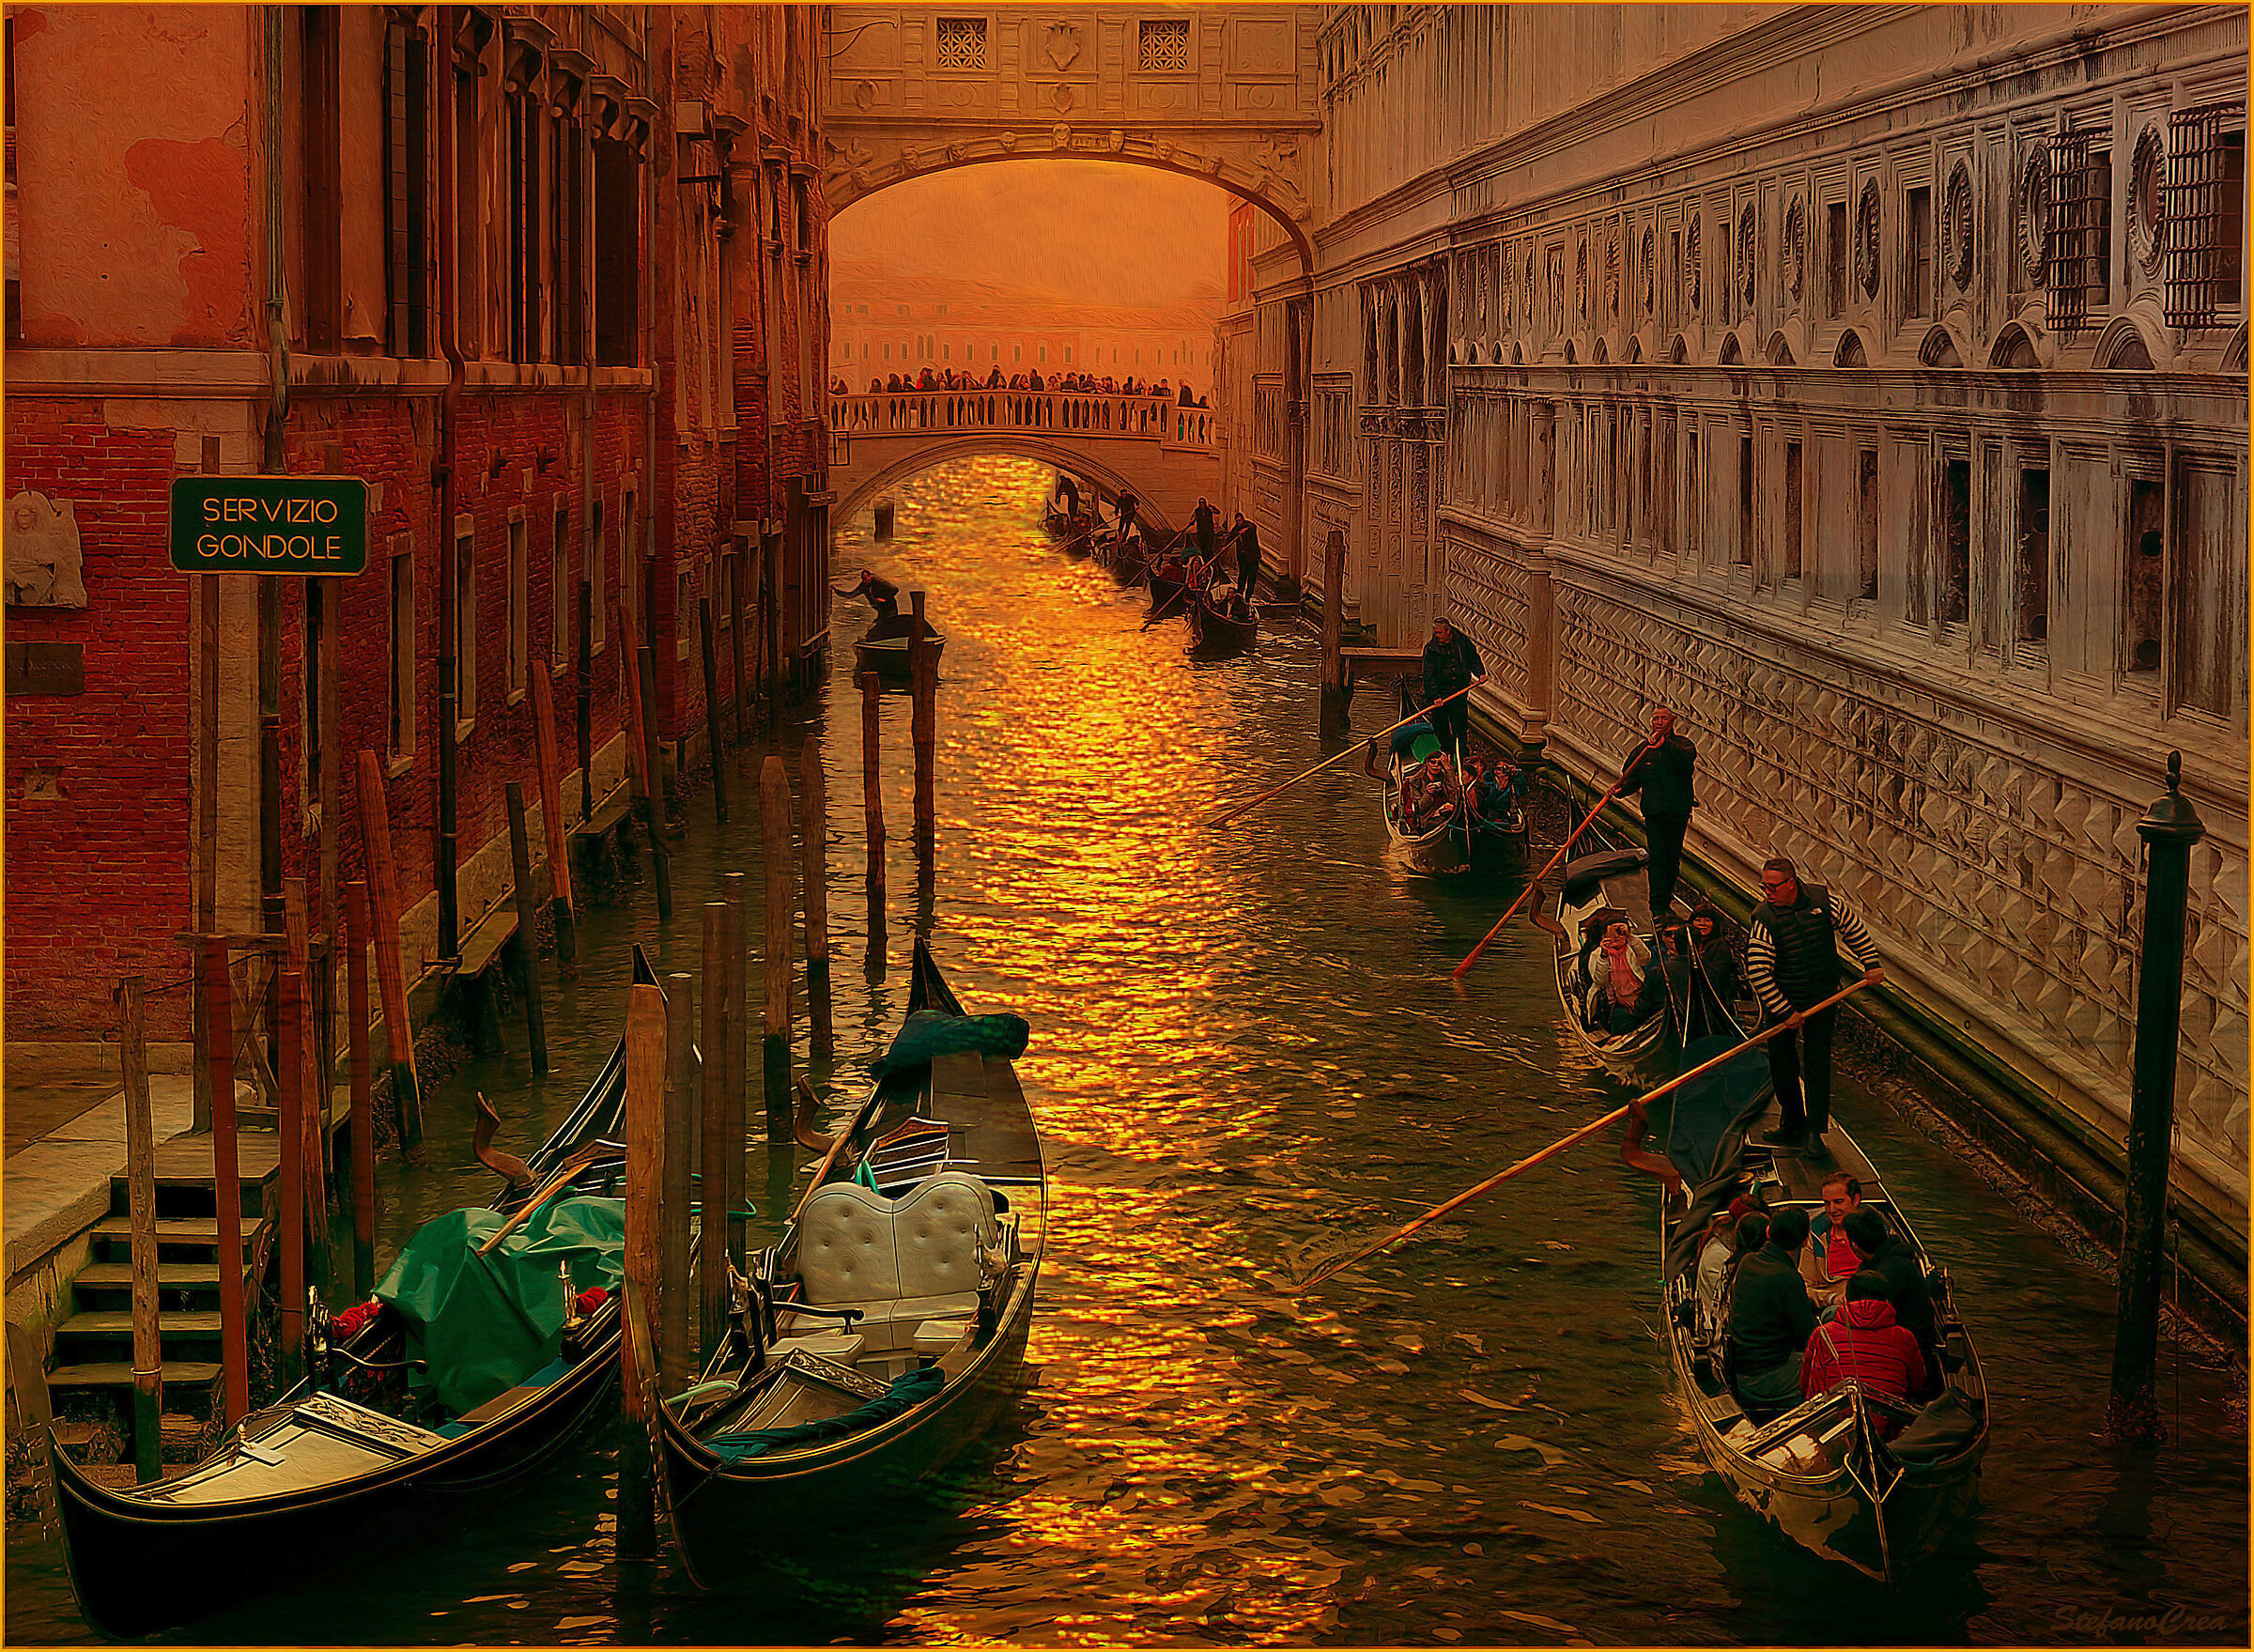 The gondoliers...